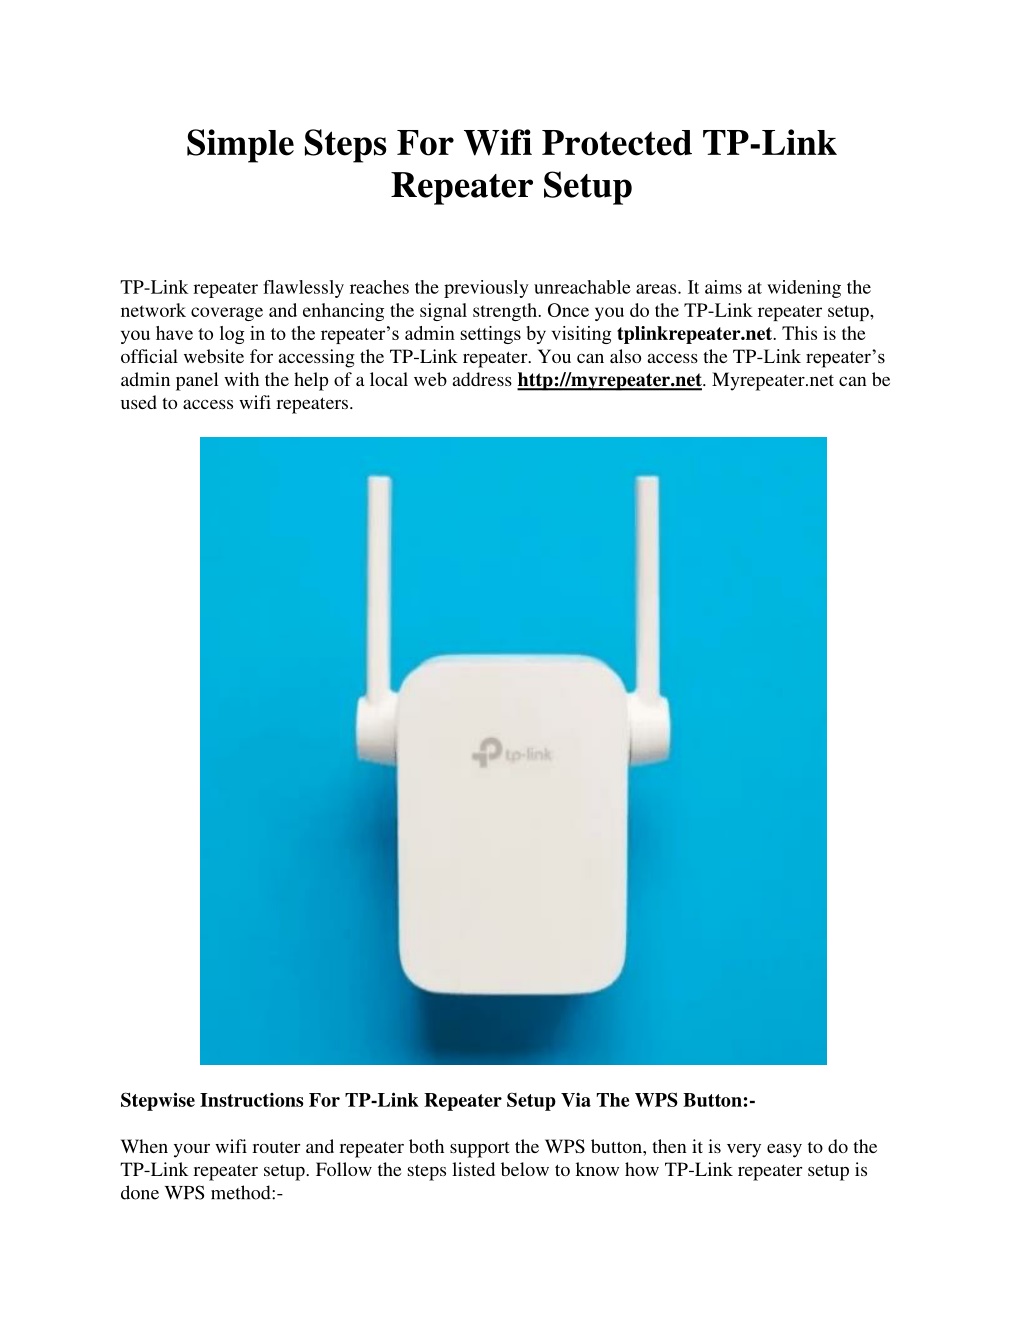 Configure your WIFI REPEATER as an ACCESS POINT